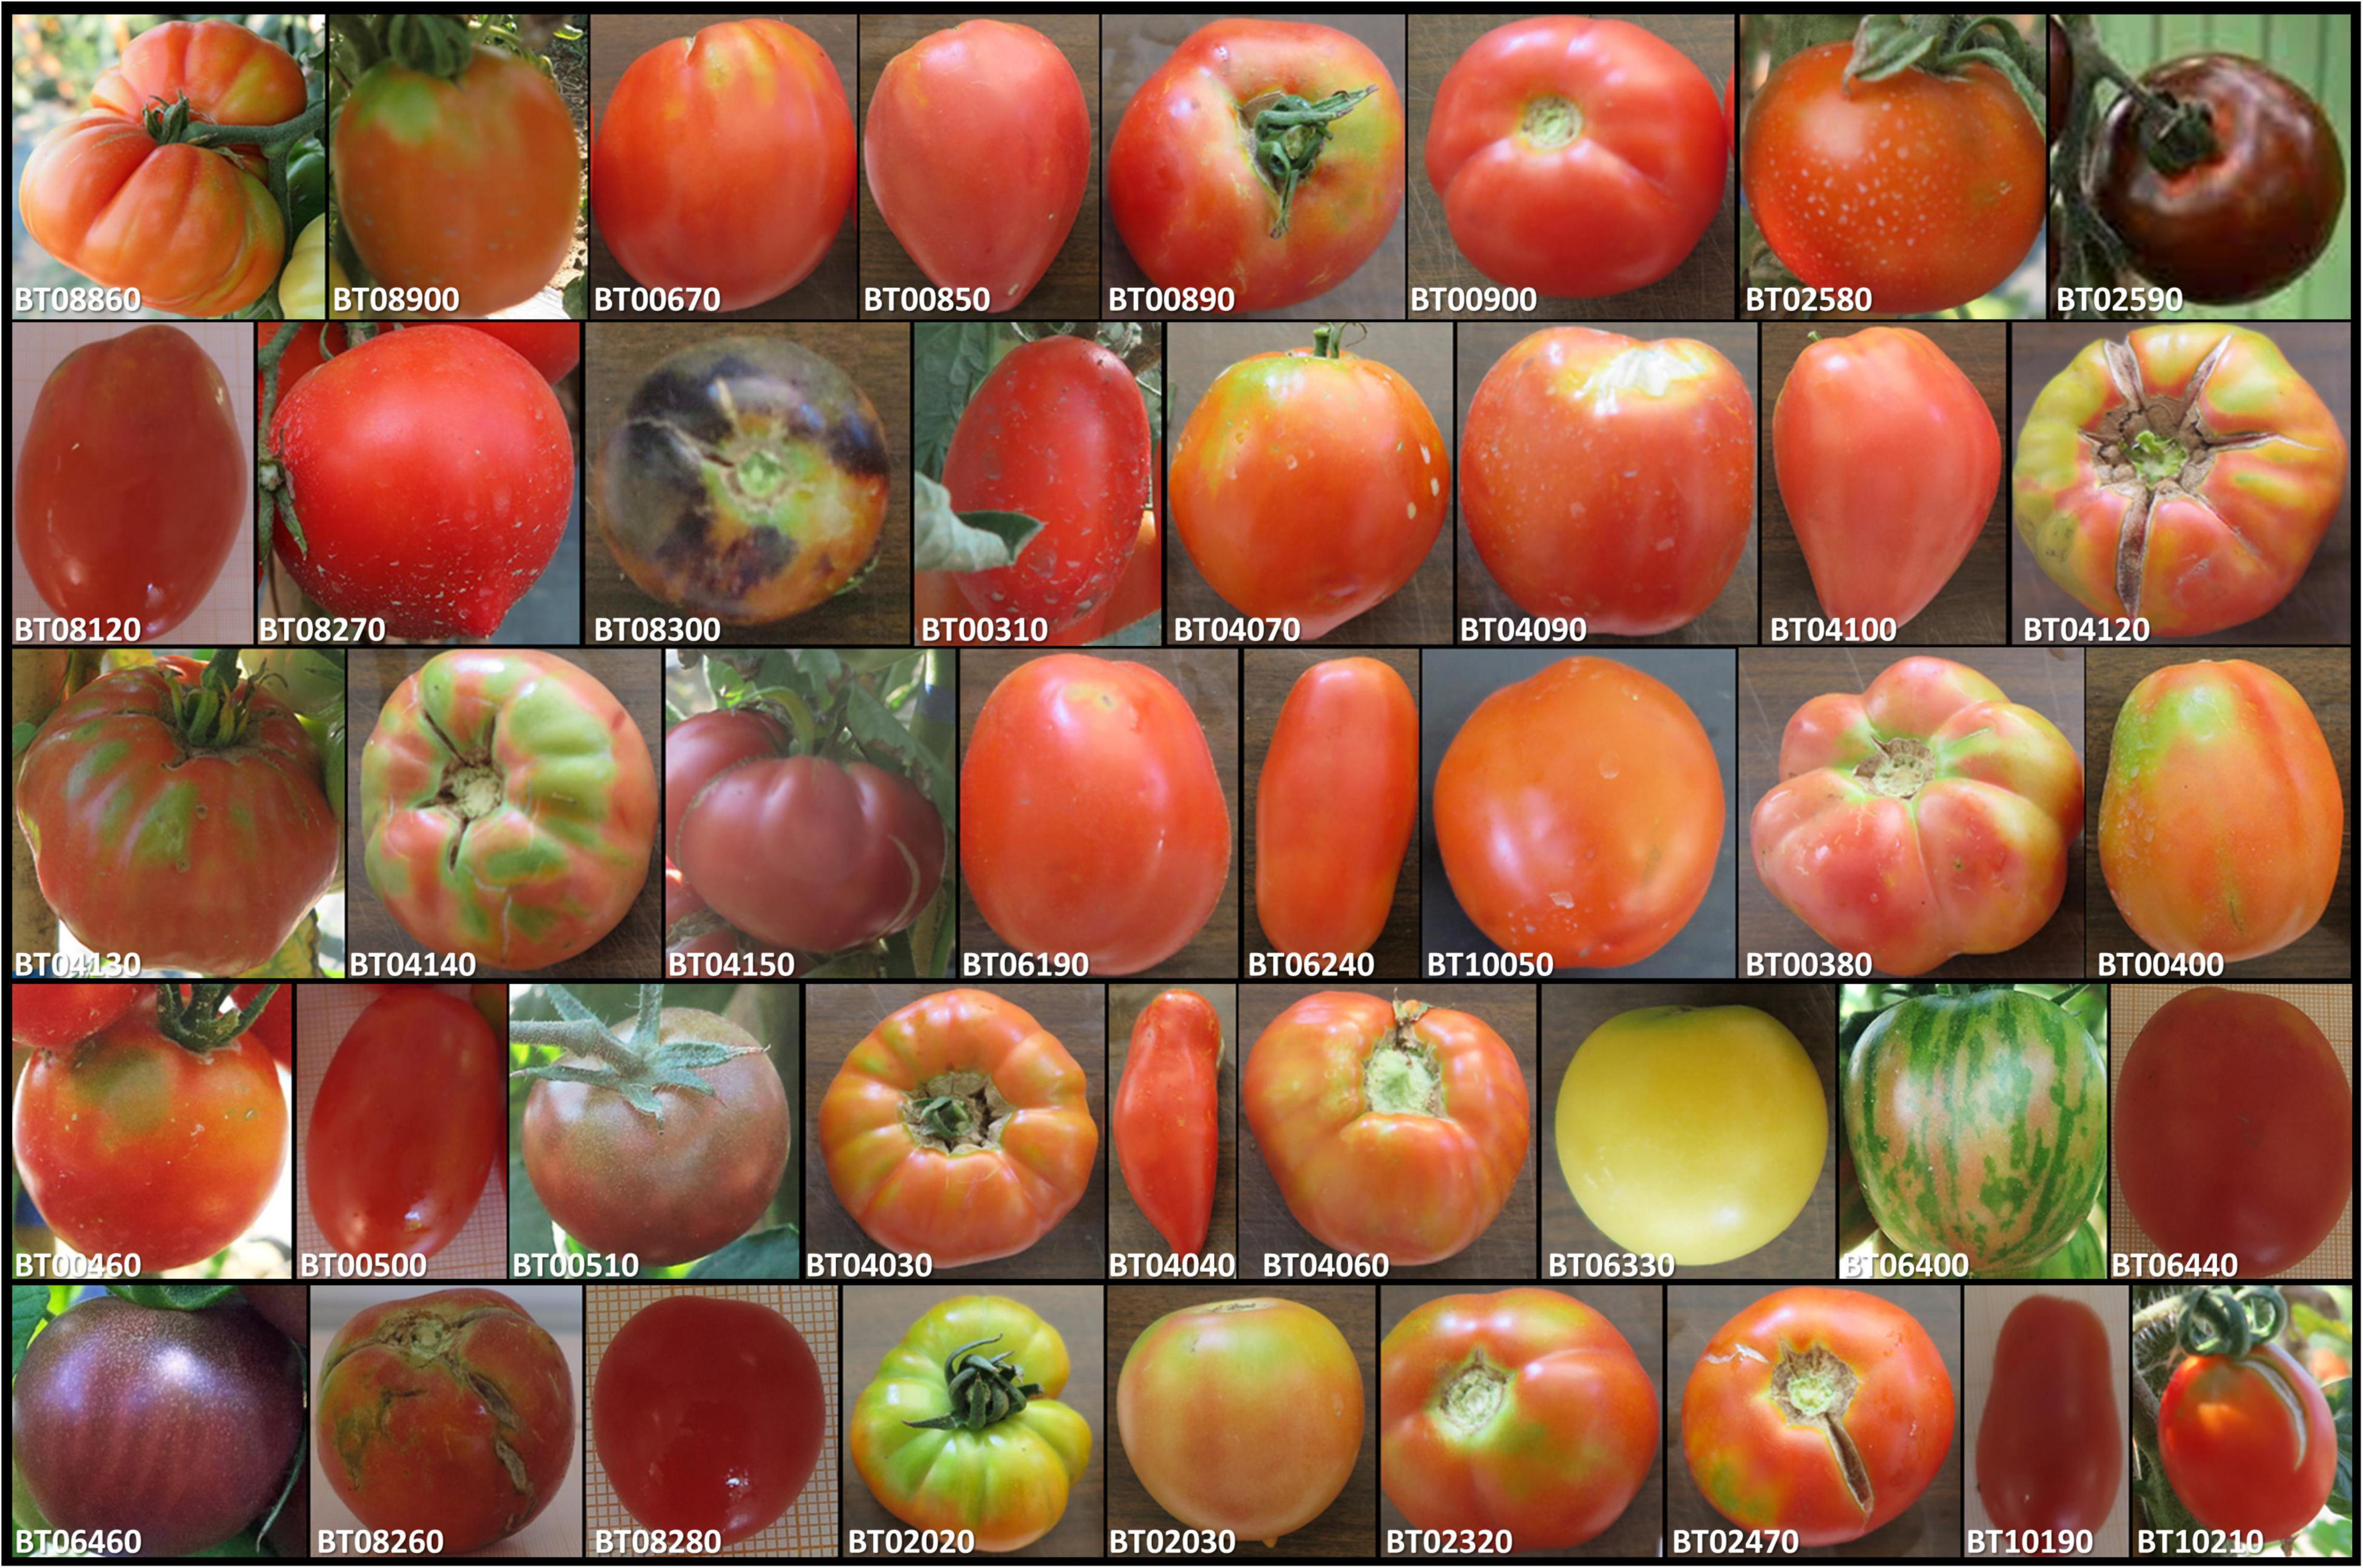 Dr. Richter's fresh produce guide: [more than 300 varieties from